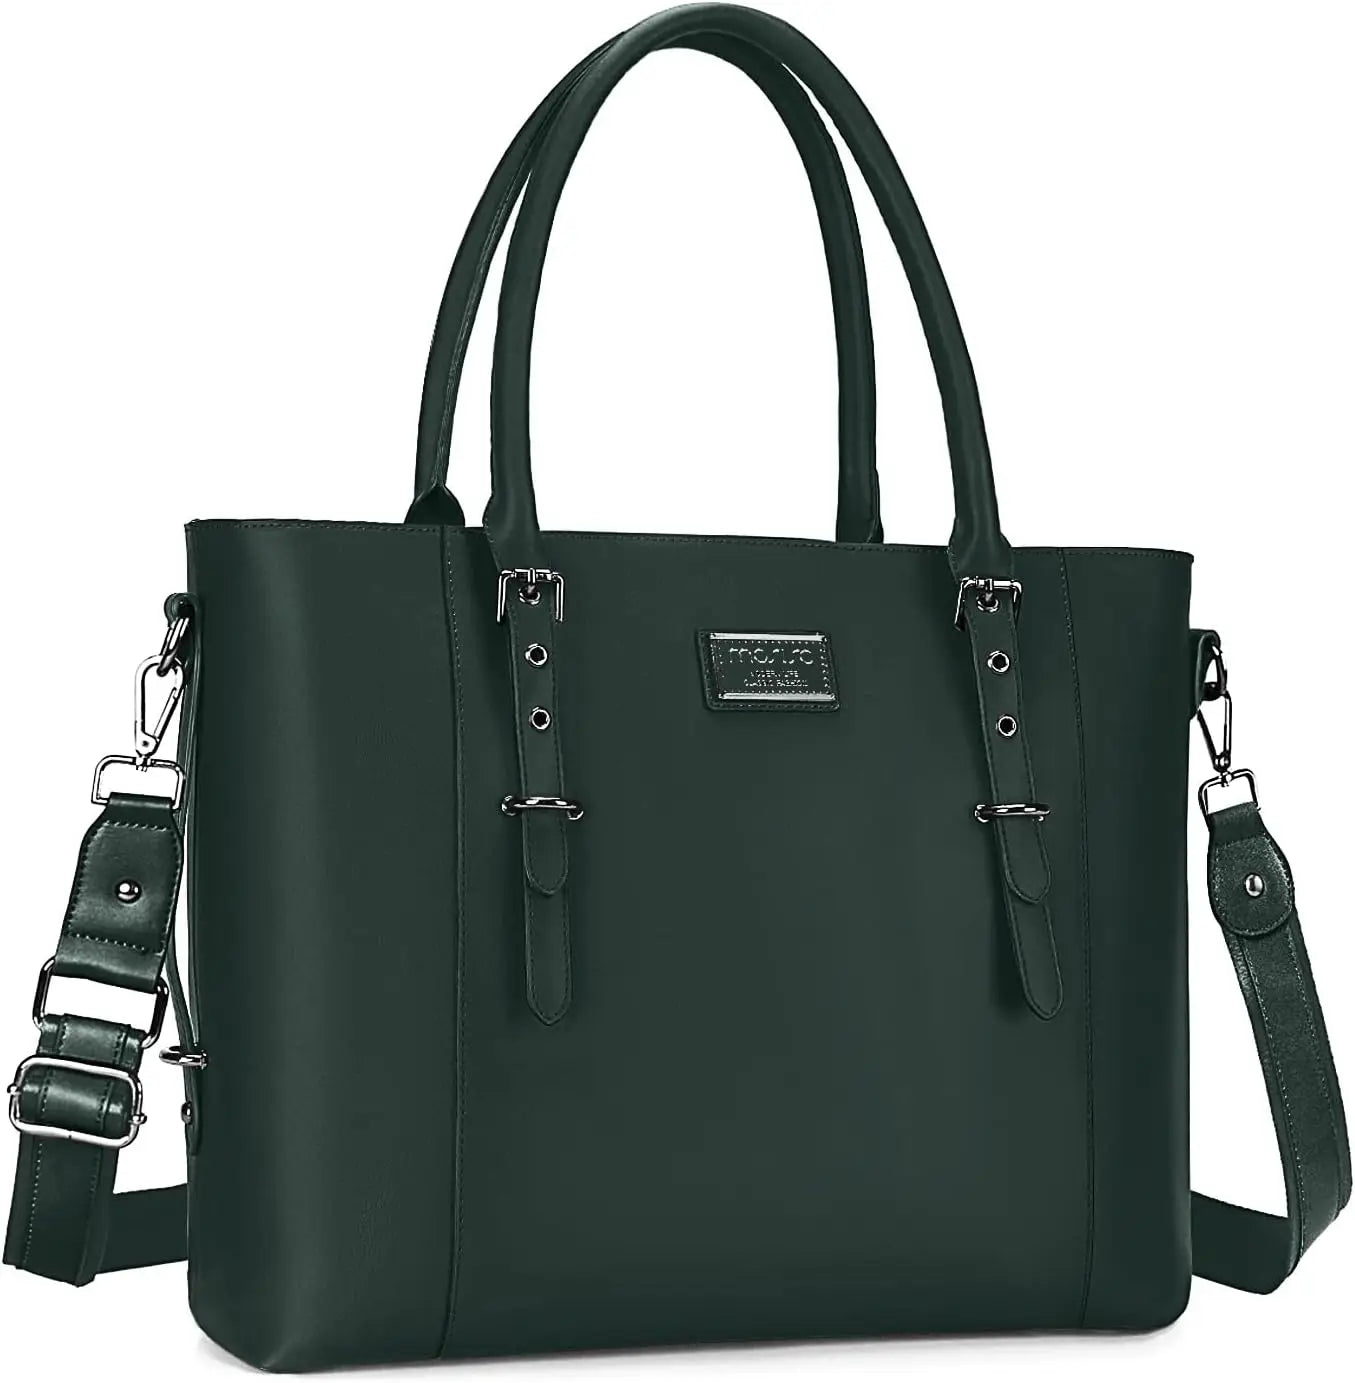 Women's 17 inch Laptop Tote The Store Bags Midnight Green 17.3 inch 